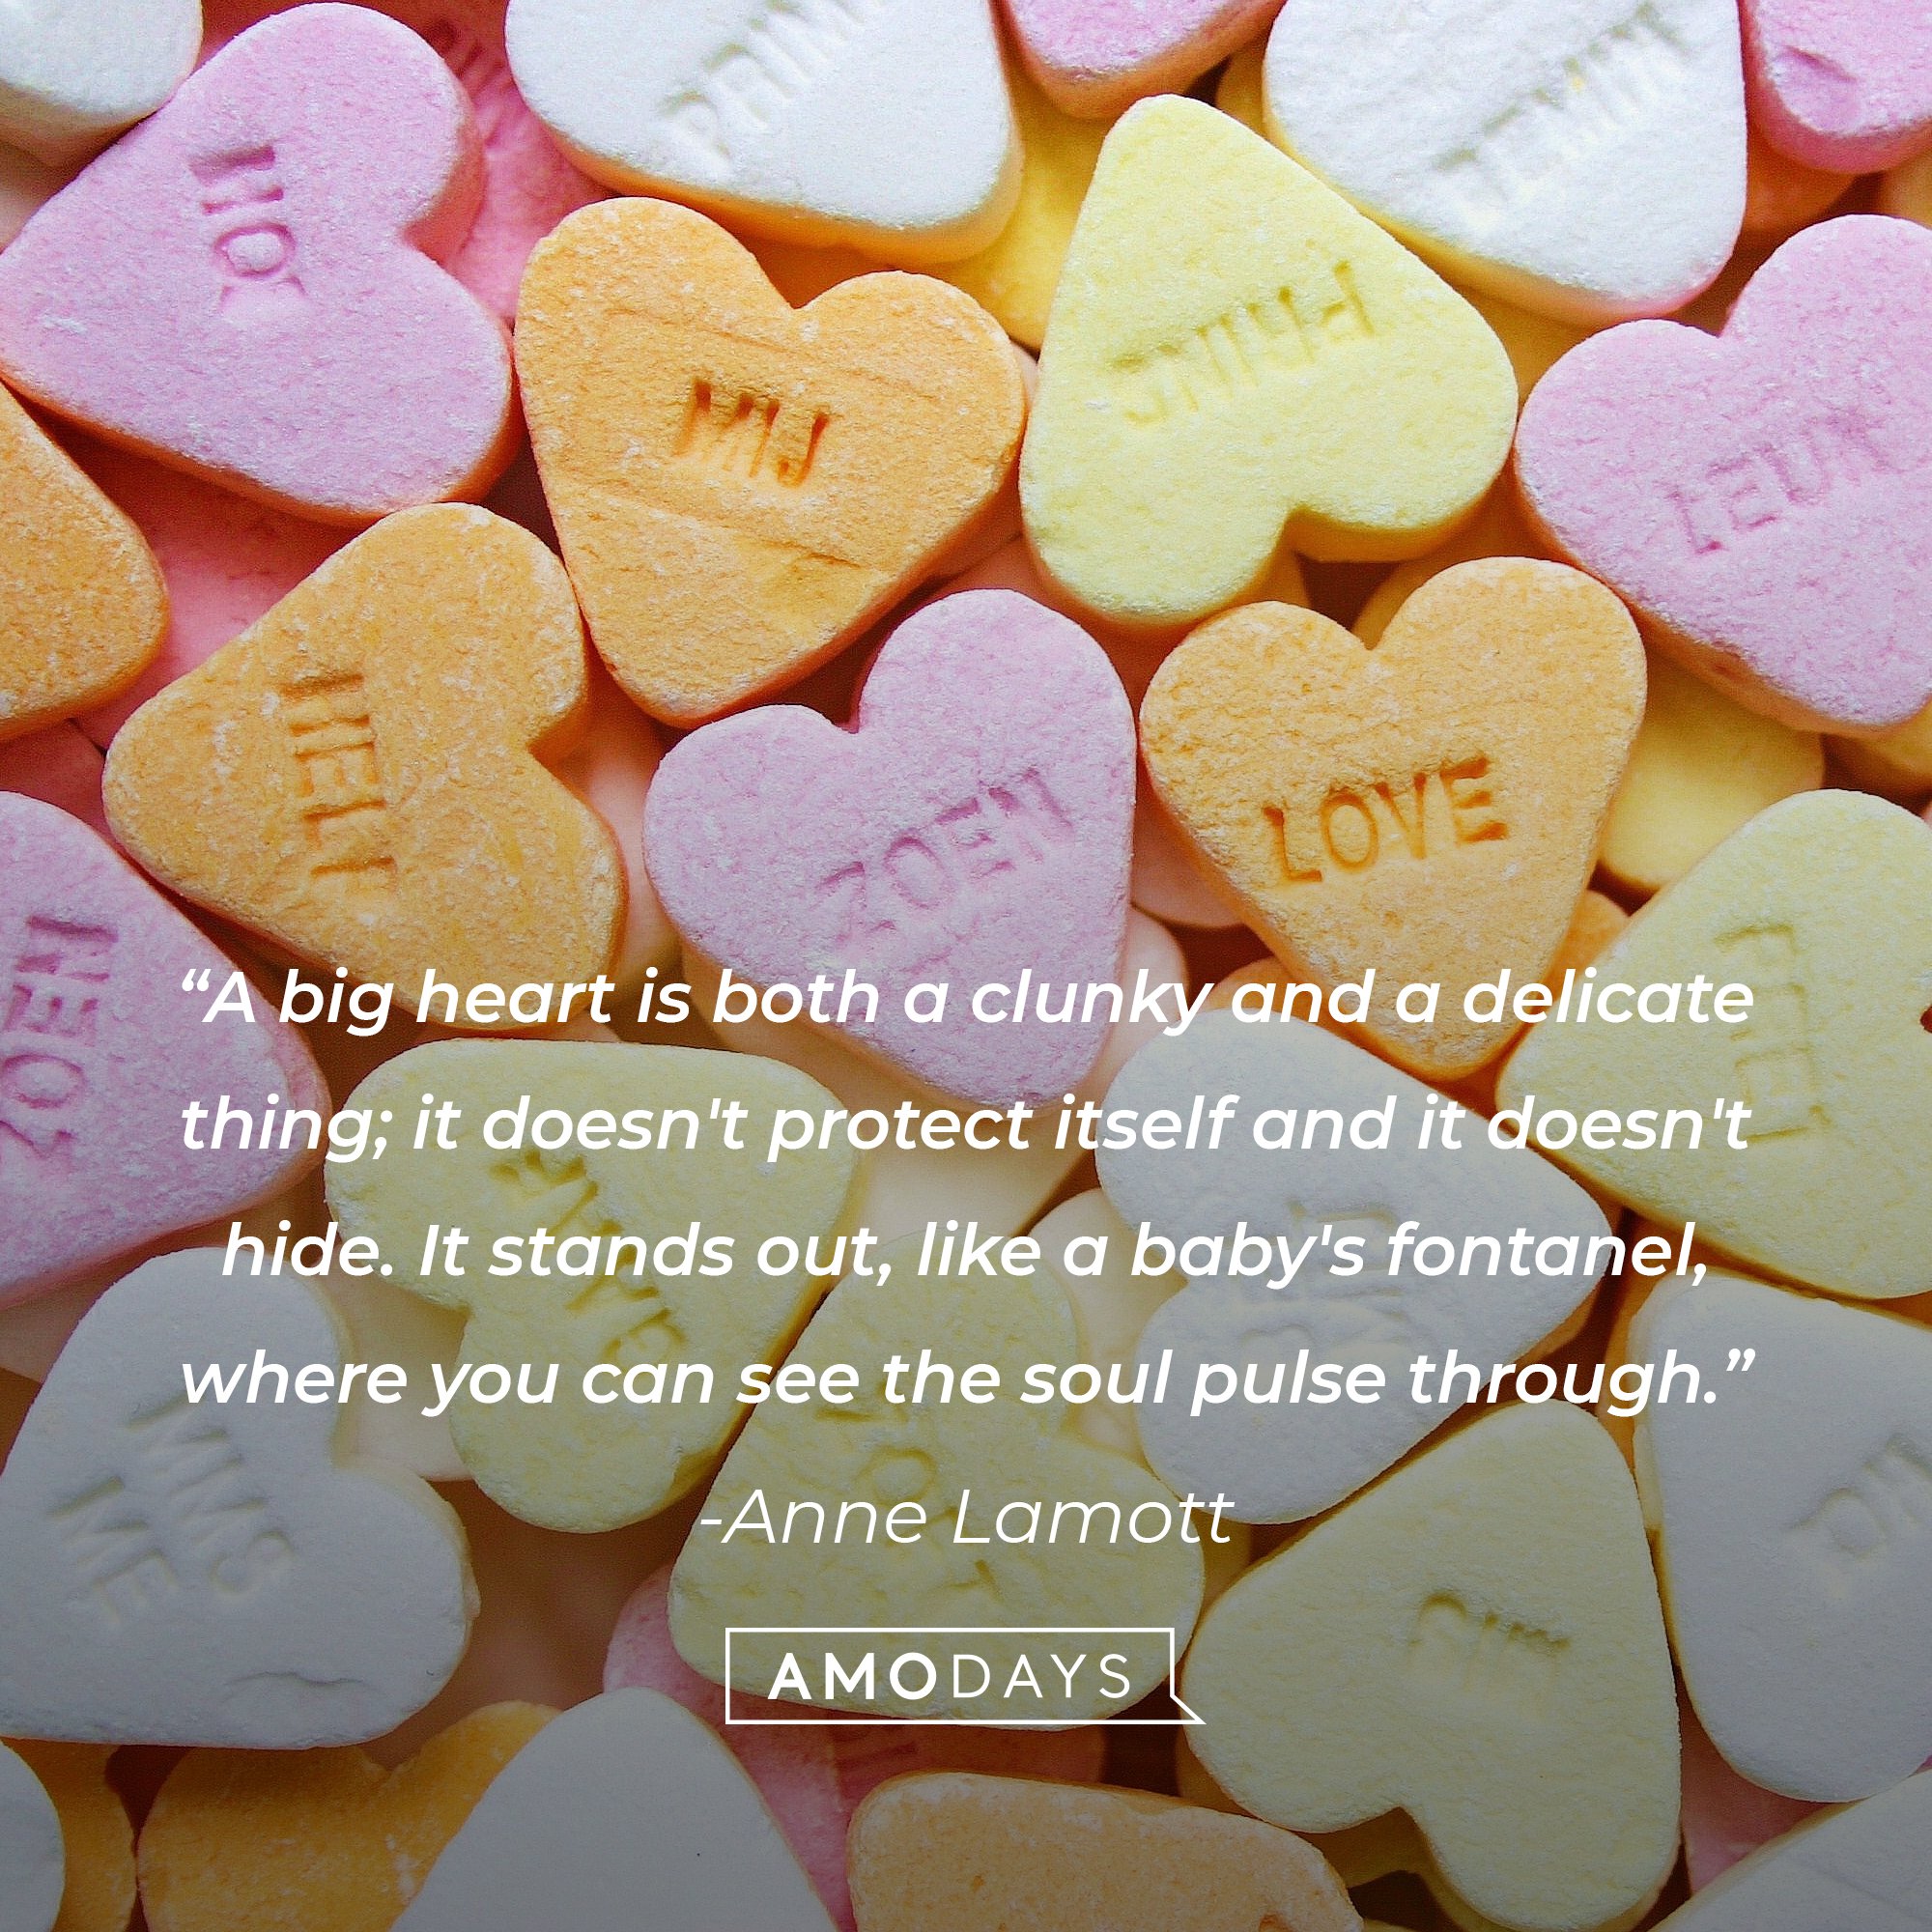 Anne Lamott's quote: "A big heart is both a clunky and a delicate thing; it doesn't protect itself and it doesn't hide. It stands out, like a baby's fontanel, where you can see the soul pulse through." | Image: AmoDays